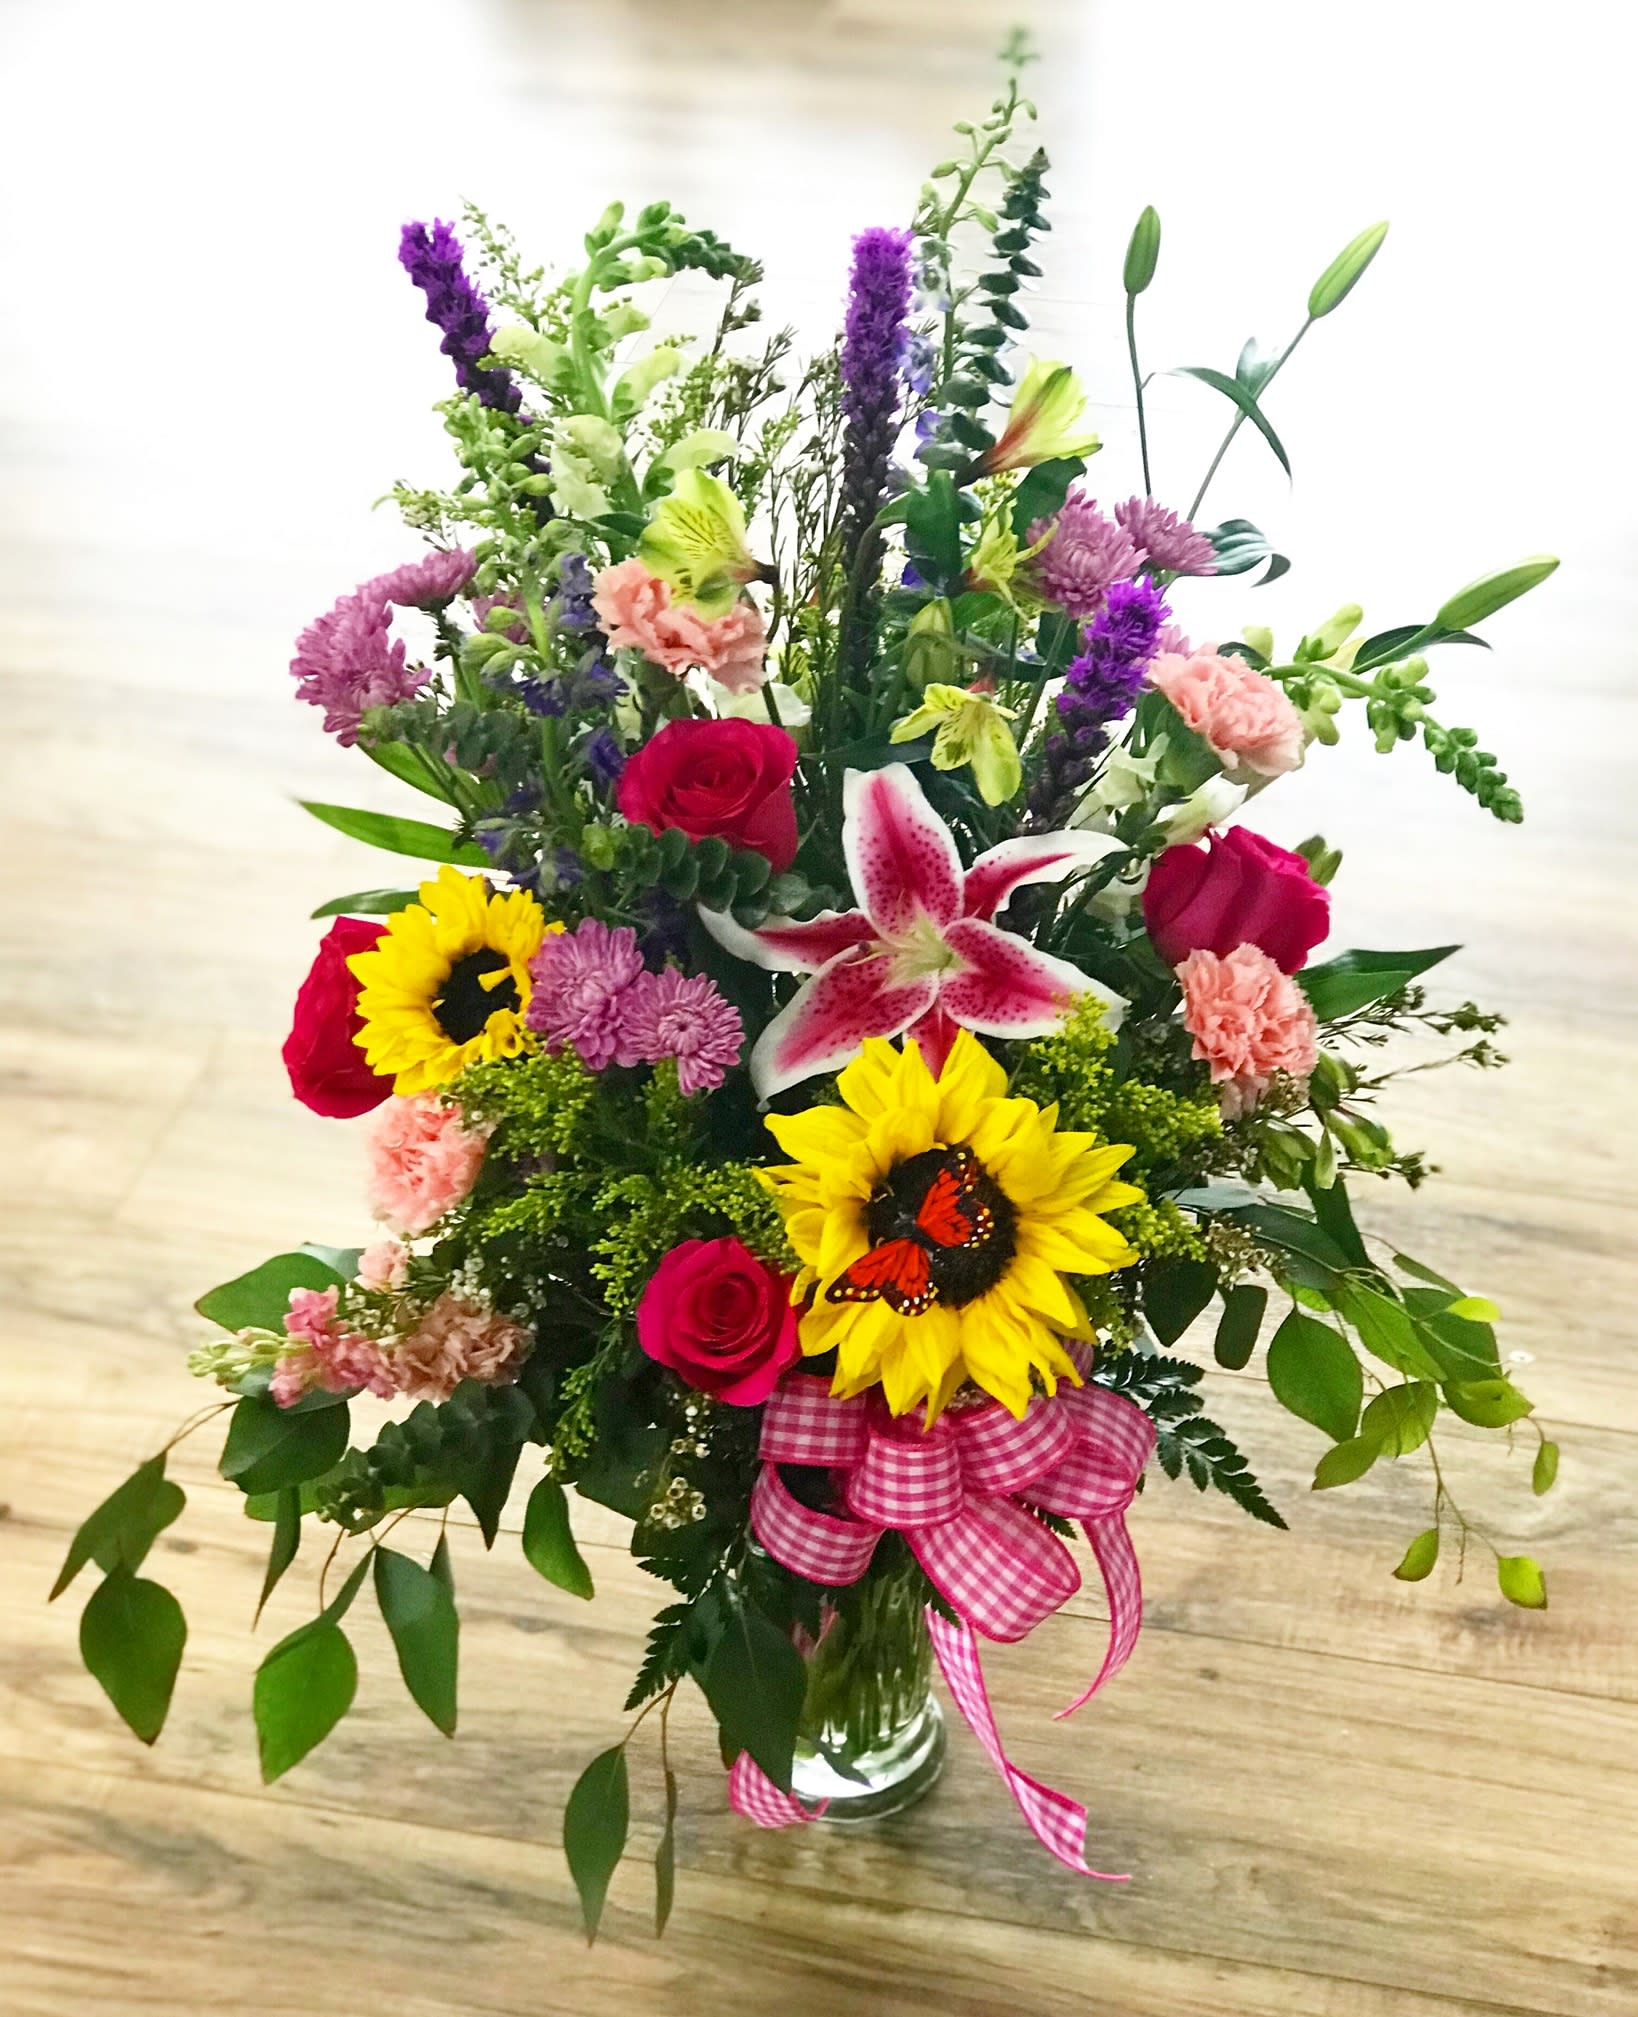 Spring Sensation - A beautiful mix of lilies, sunflowers, mums, roses and other fun colorful flowers. Includes a butterfly accent.